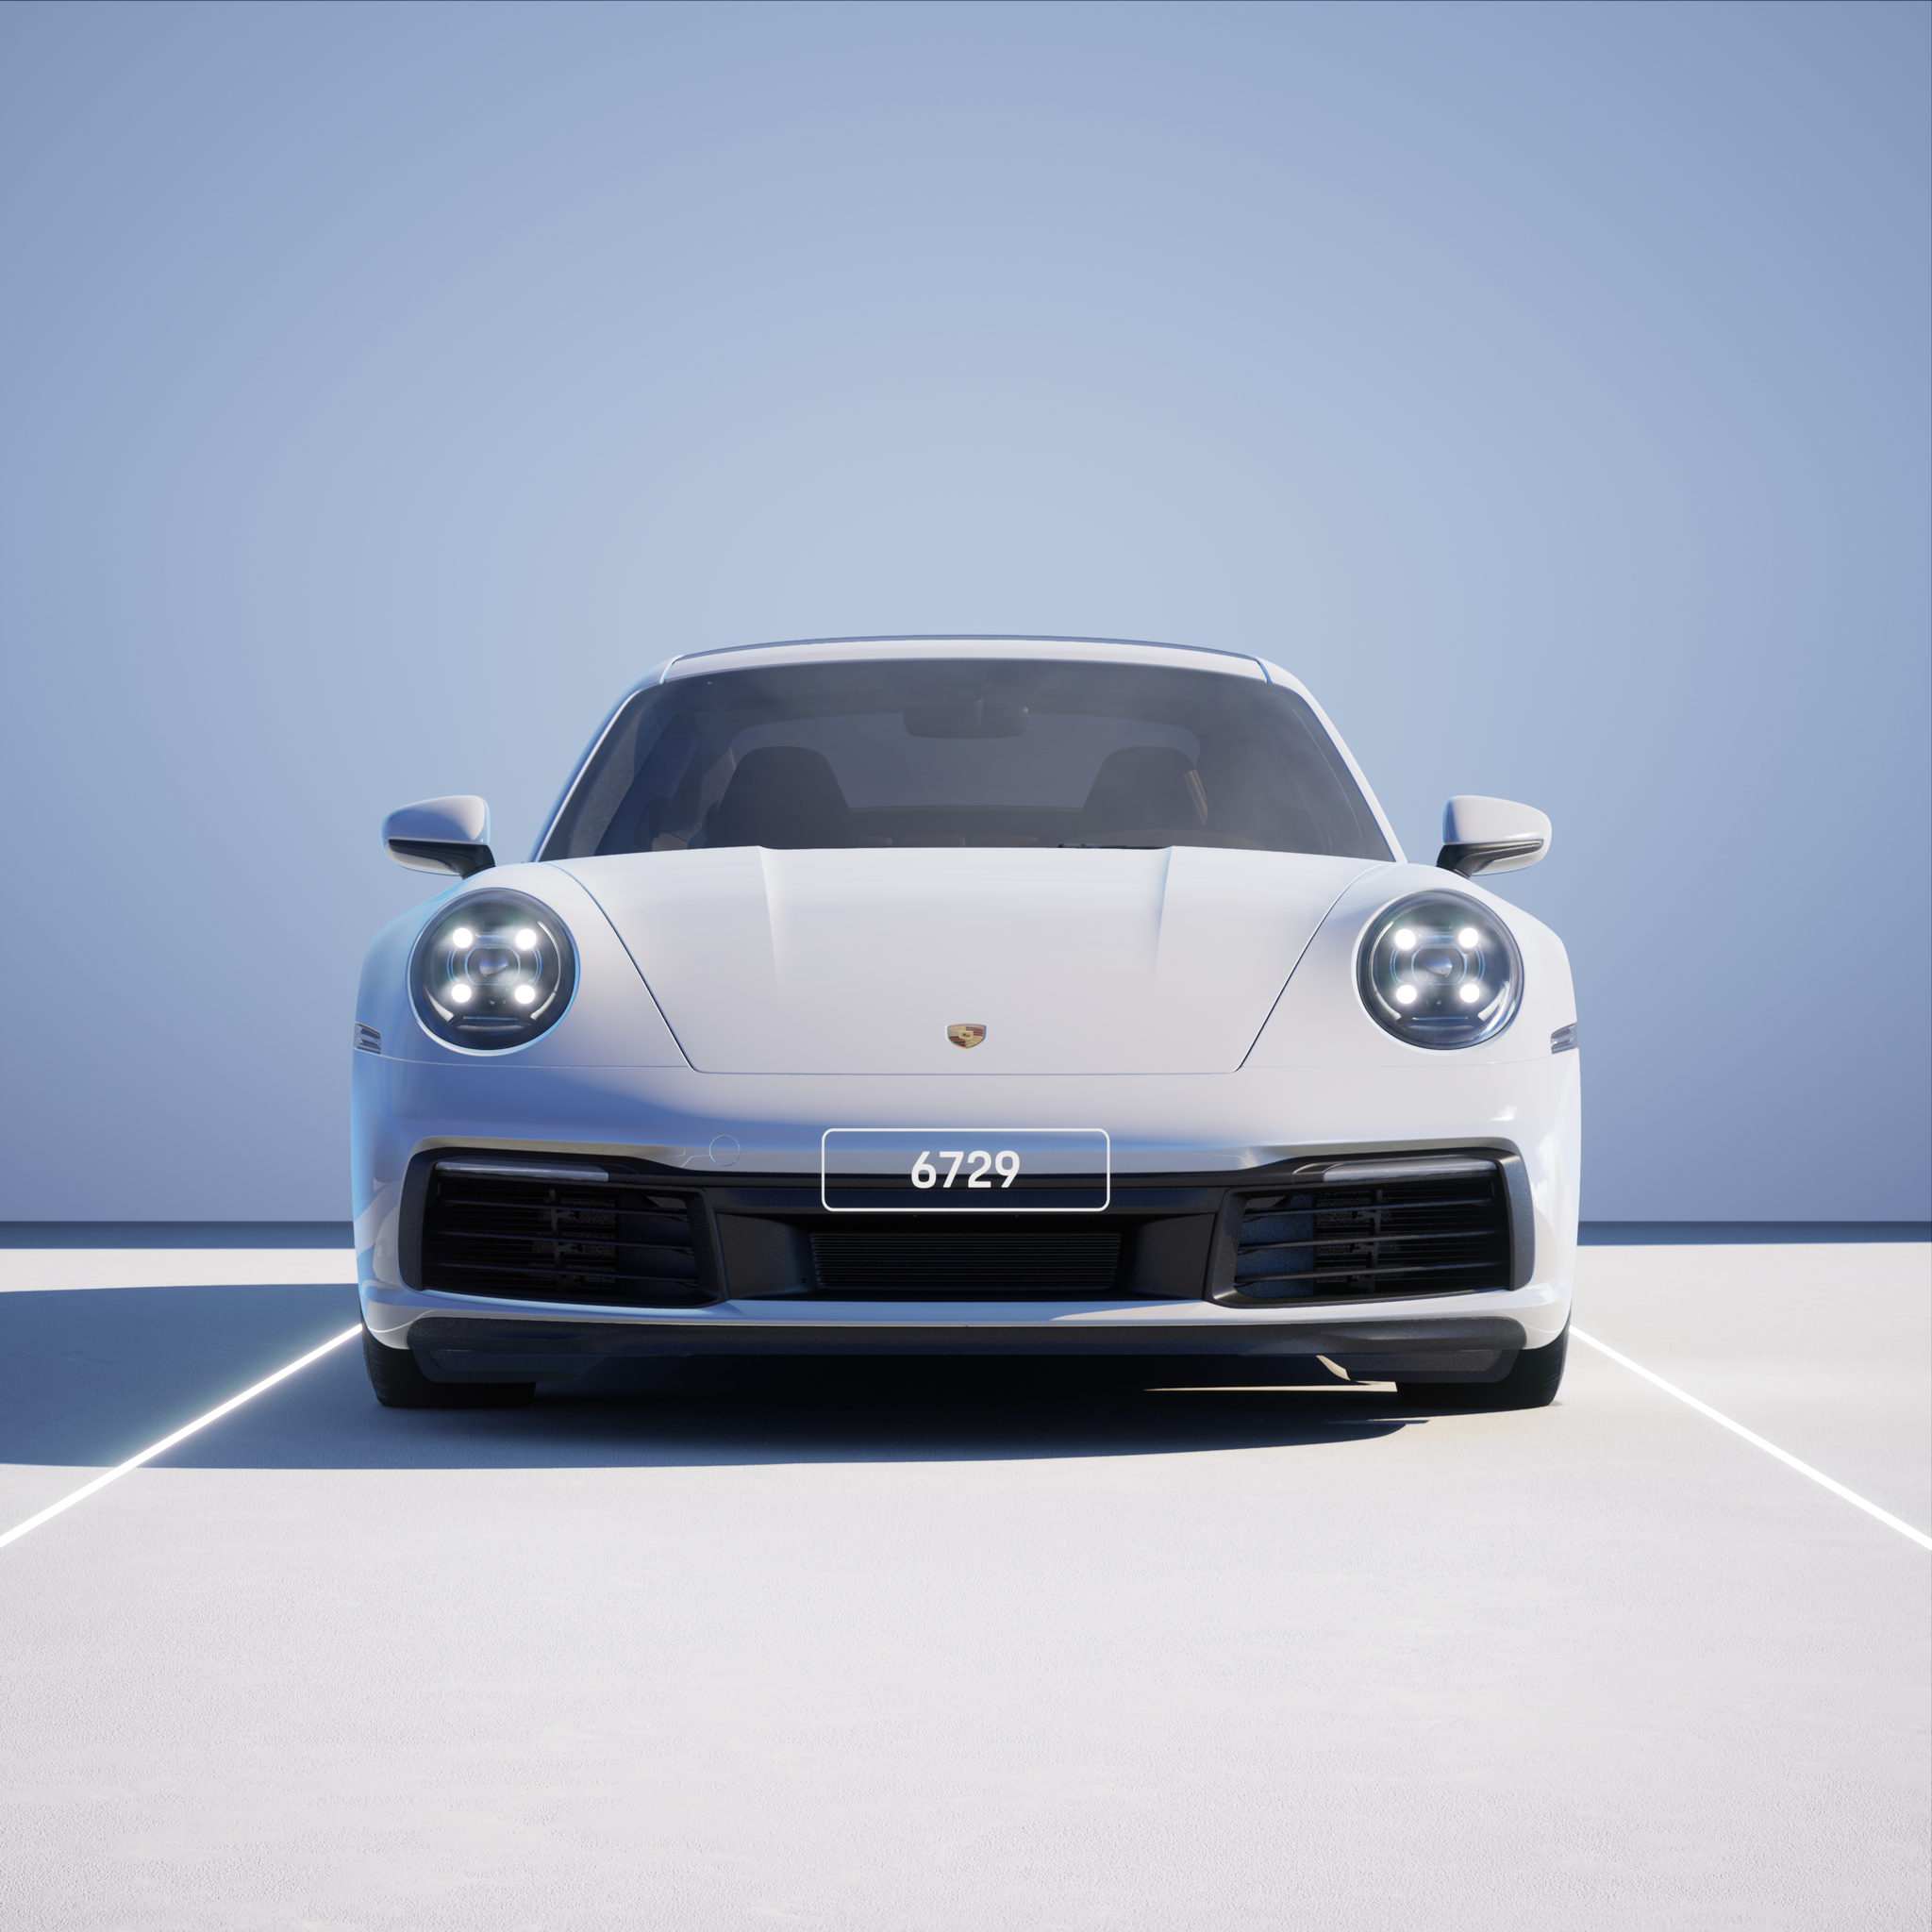 The PORSCHΞ 911 6729 image in phase